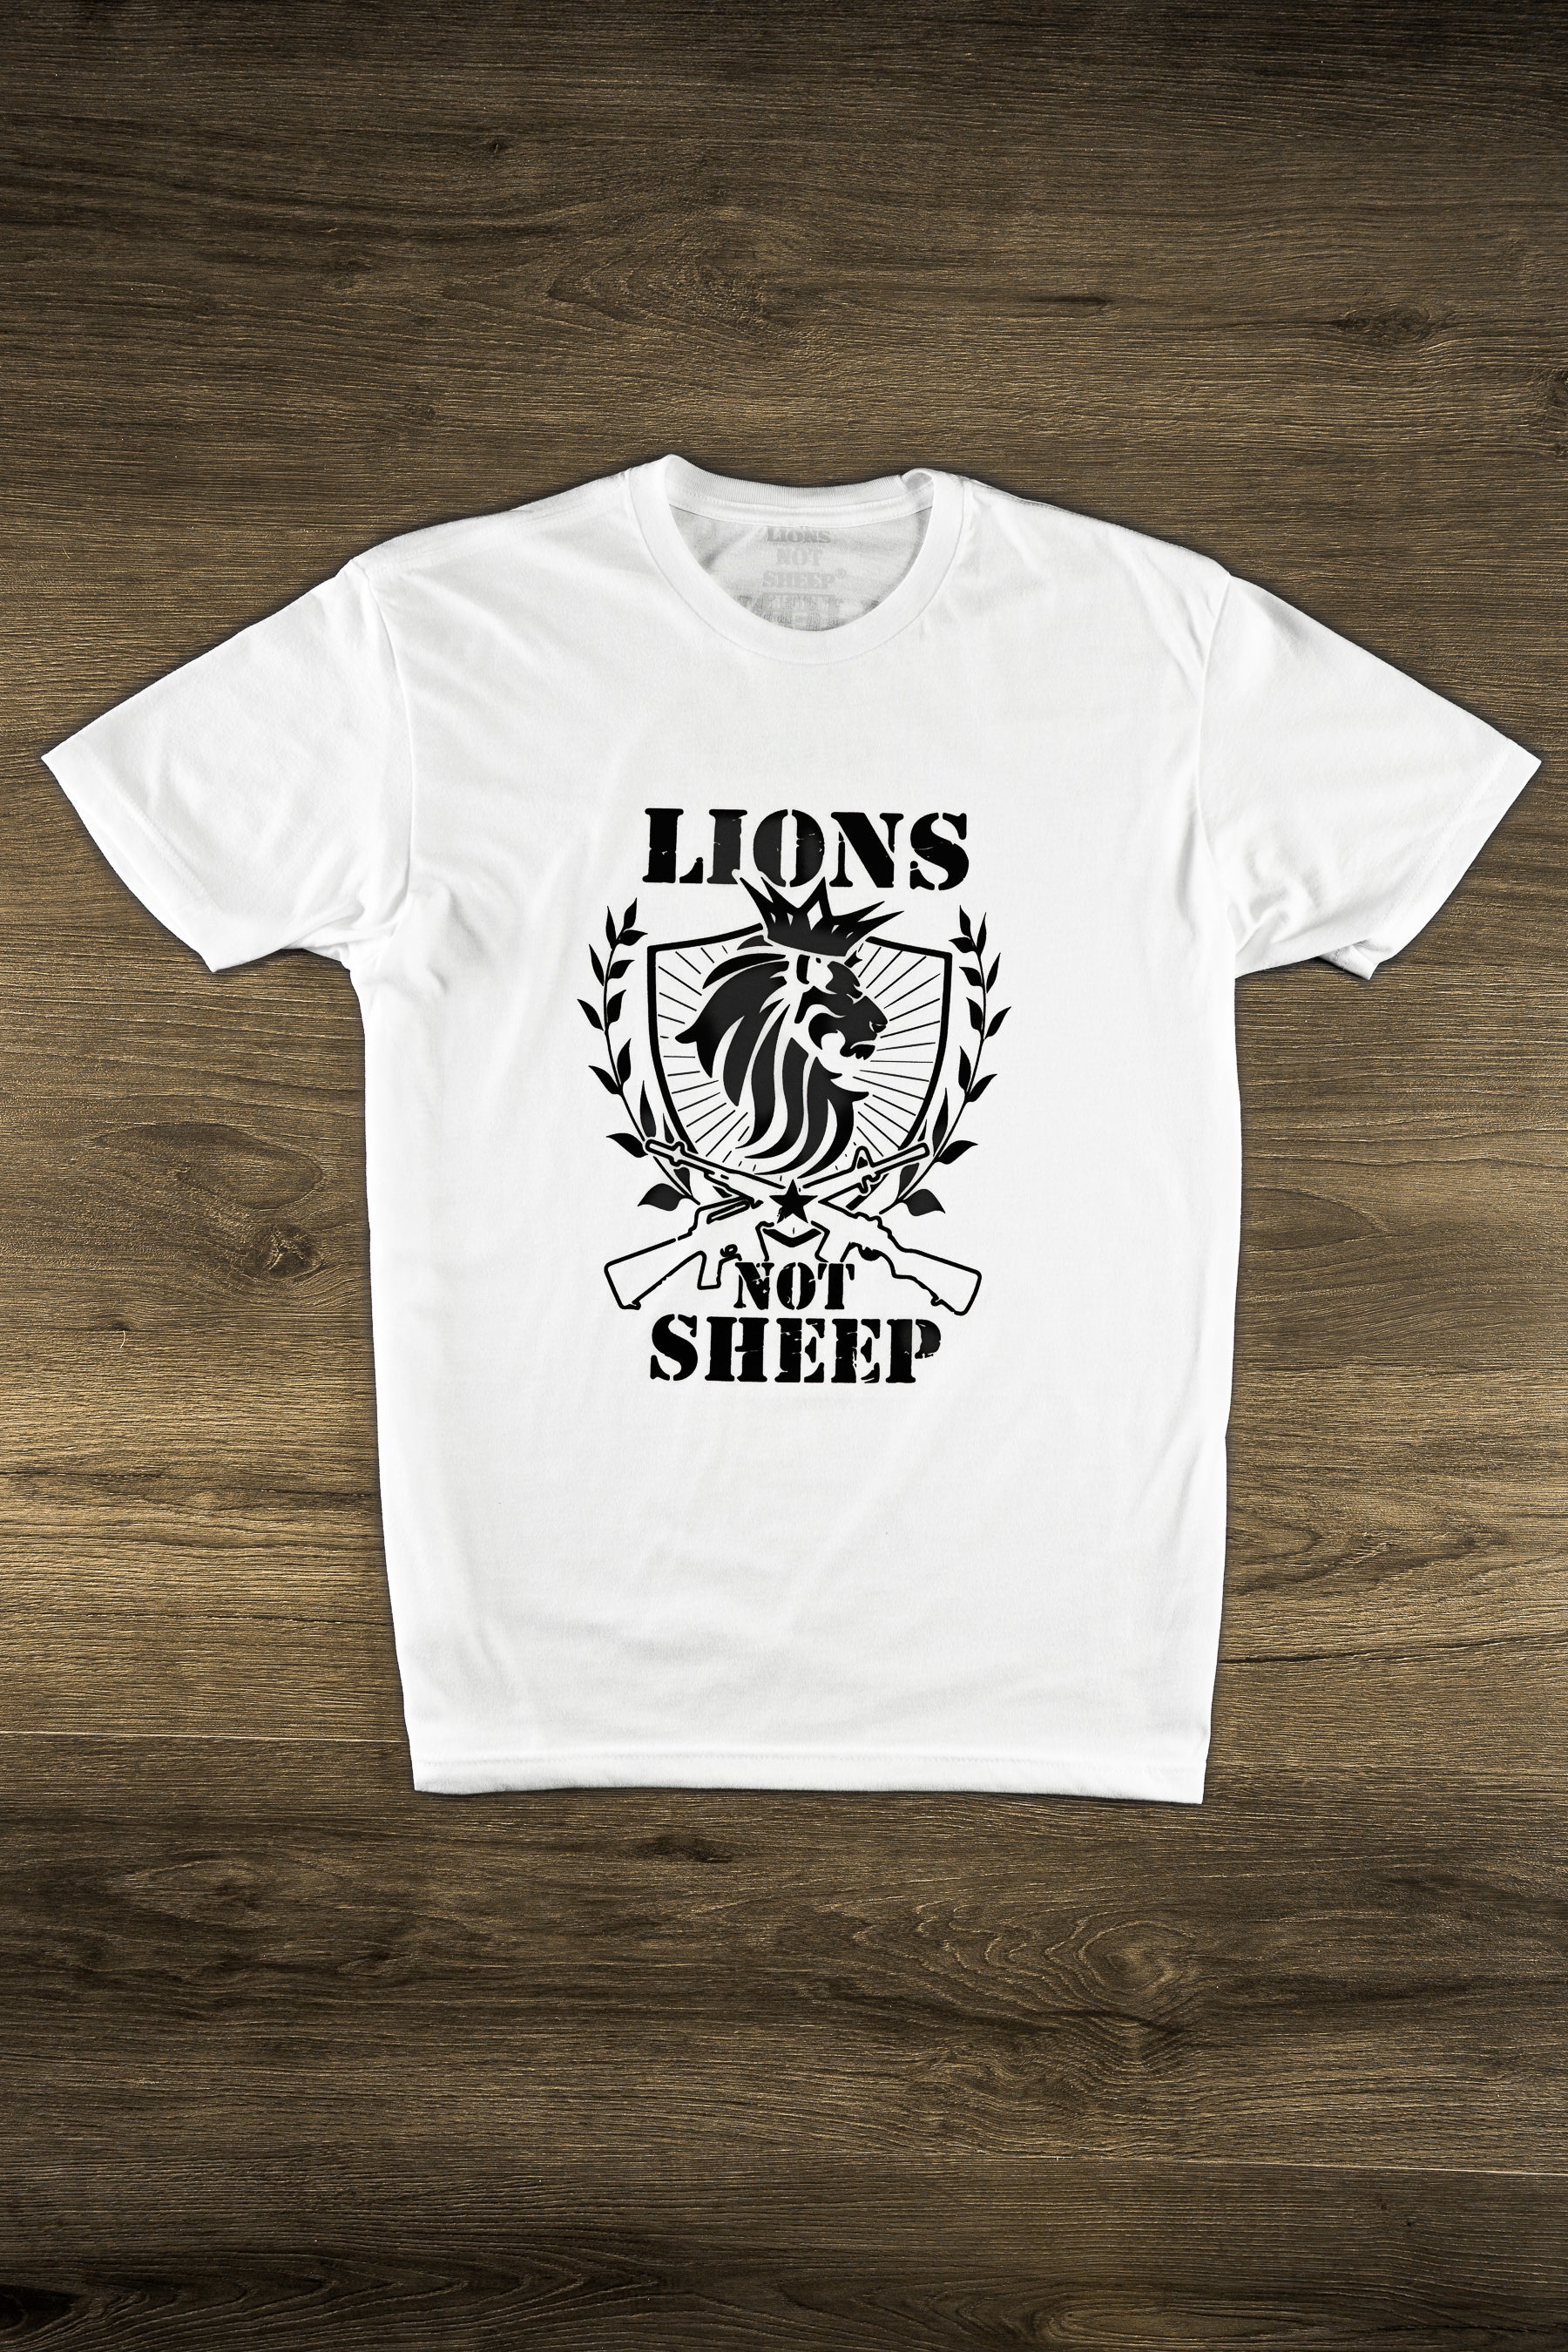 Lions Not Sheep "Rifle" Tee (White Edition) - Lions Not Sheep ®